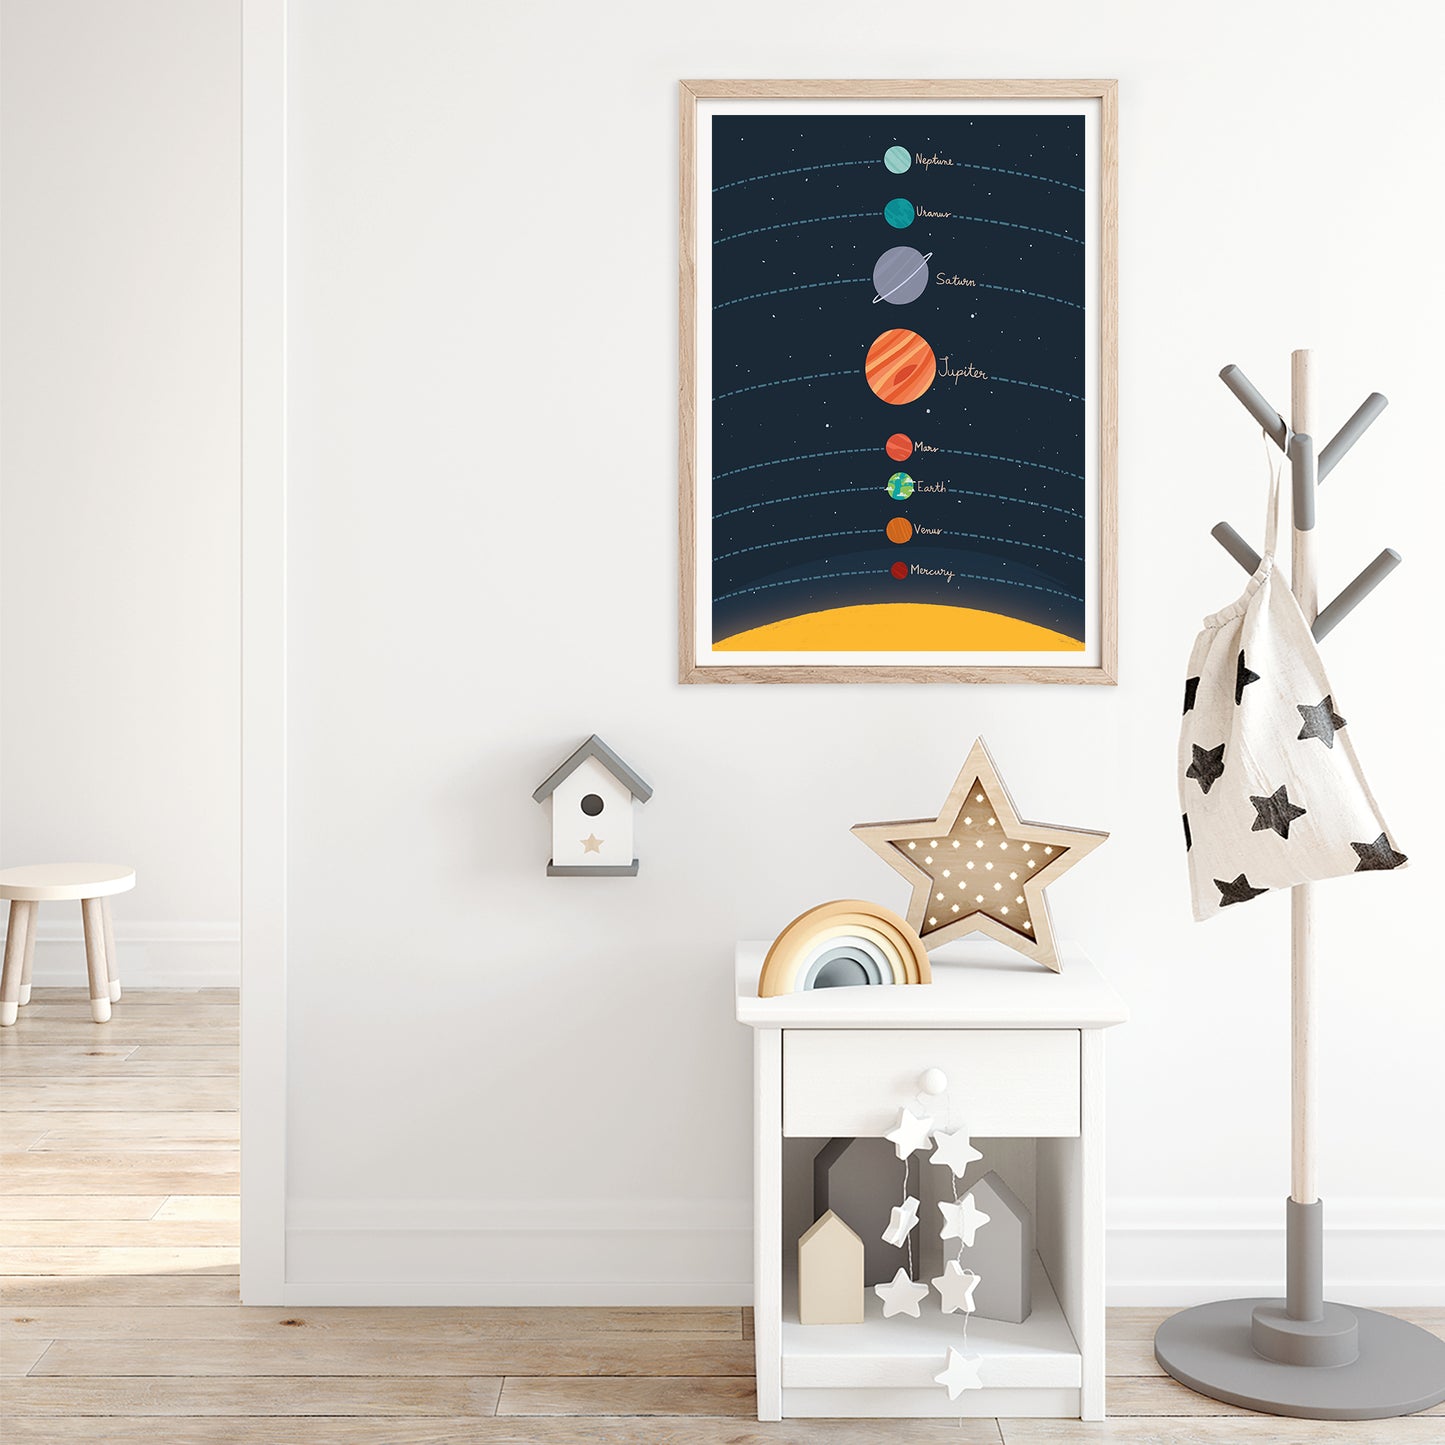 Planets of the solar system in navy blue